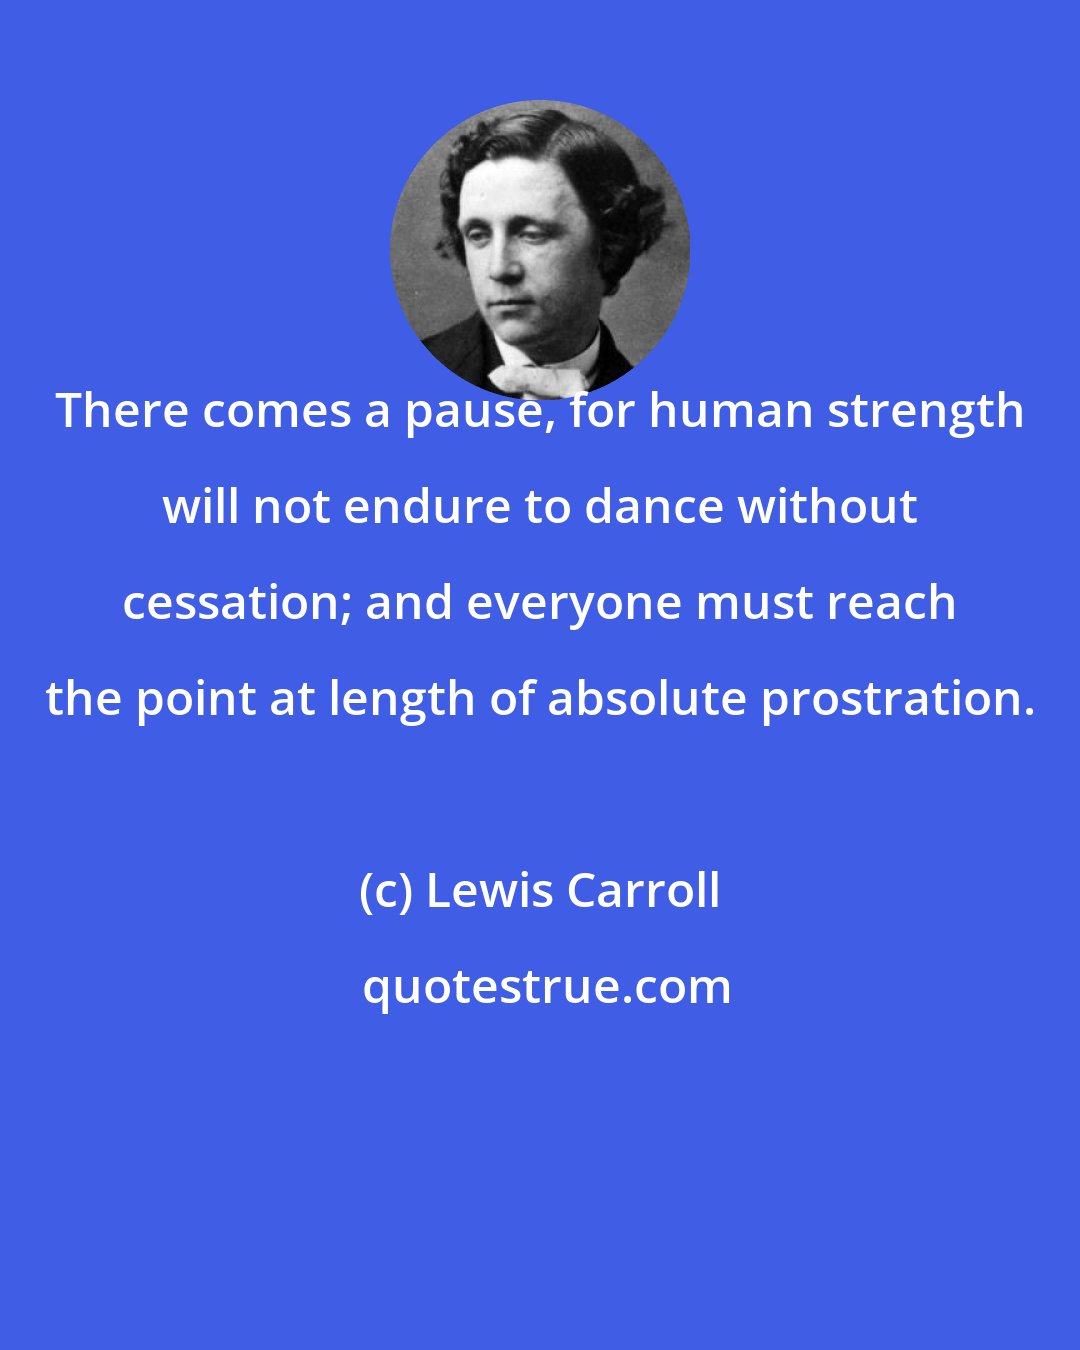 Lewis Carroll: There comes a pause, for human strength will not endure to dance without cessation; and everyone must reach the point at length of absolute prostration.